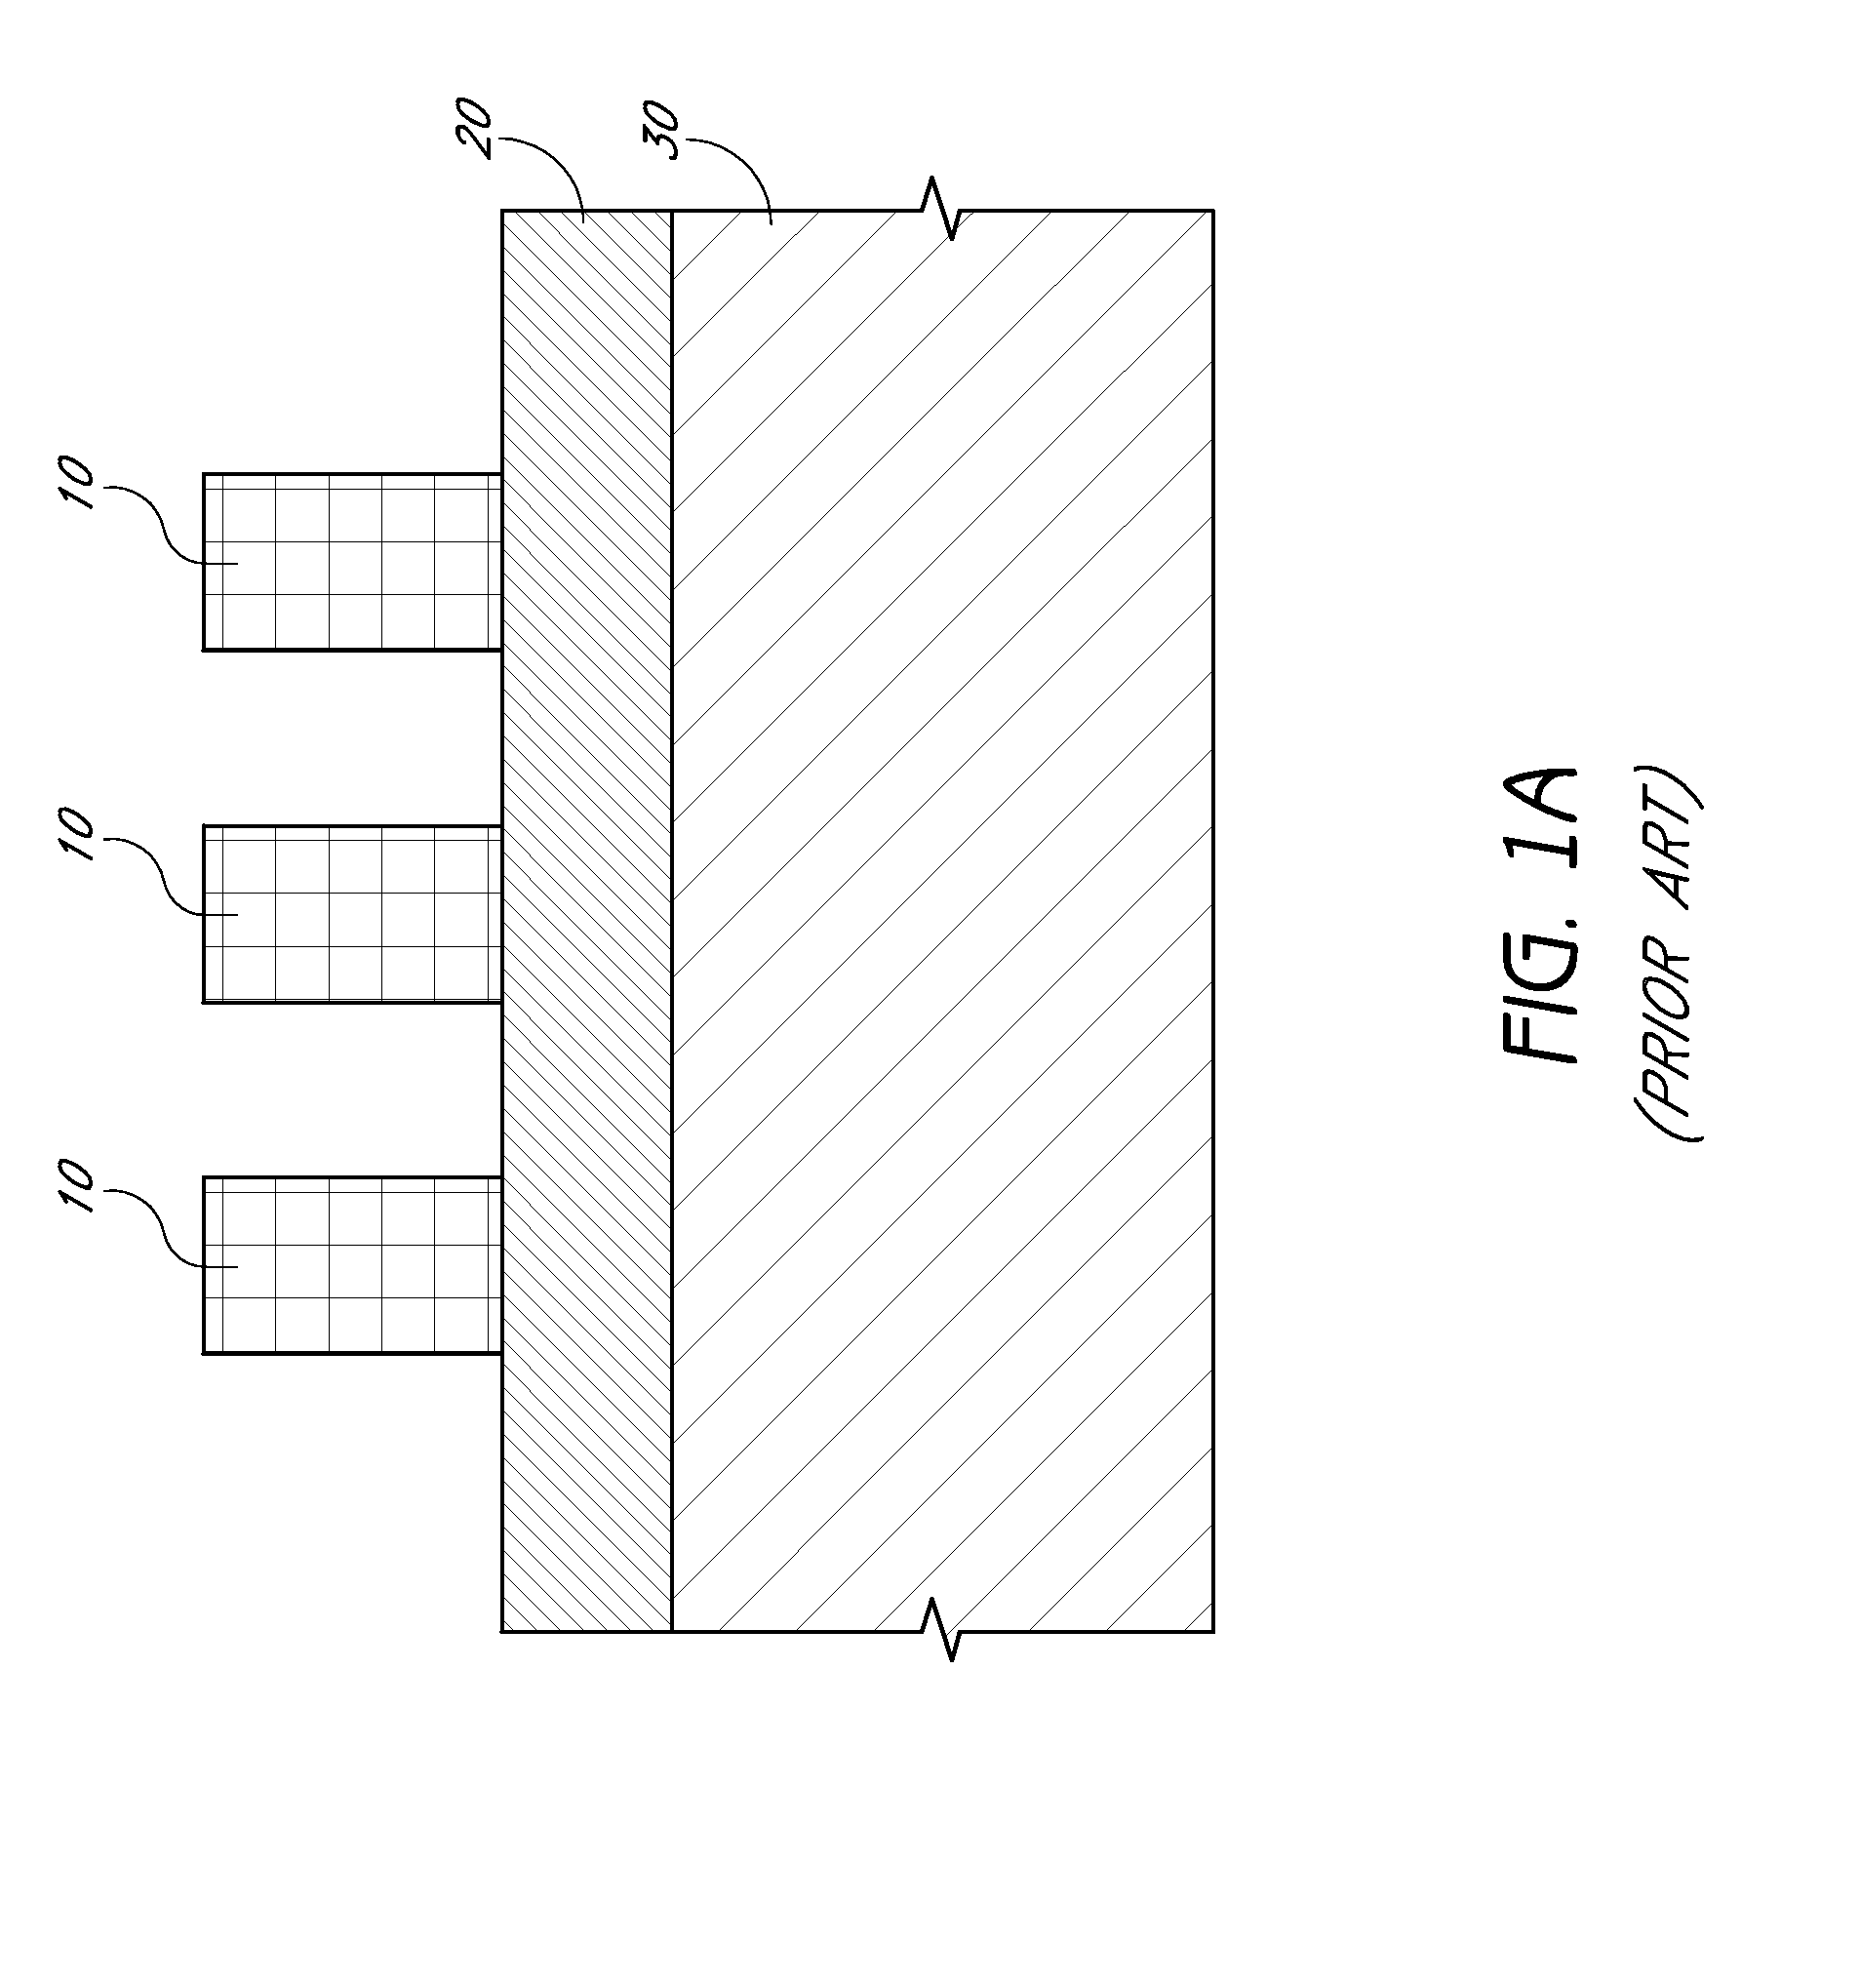 Multiple deposition for integration of spacers in pitch multiplication process